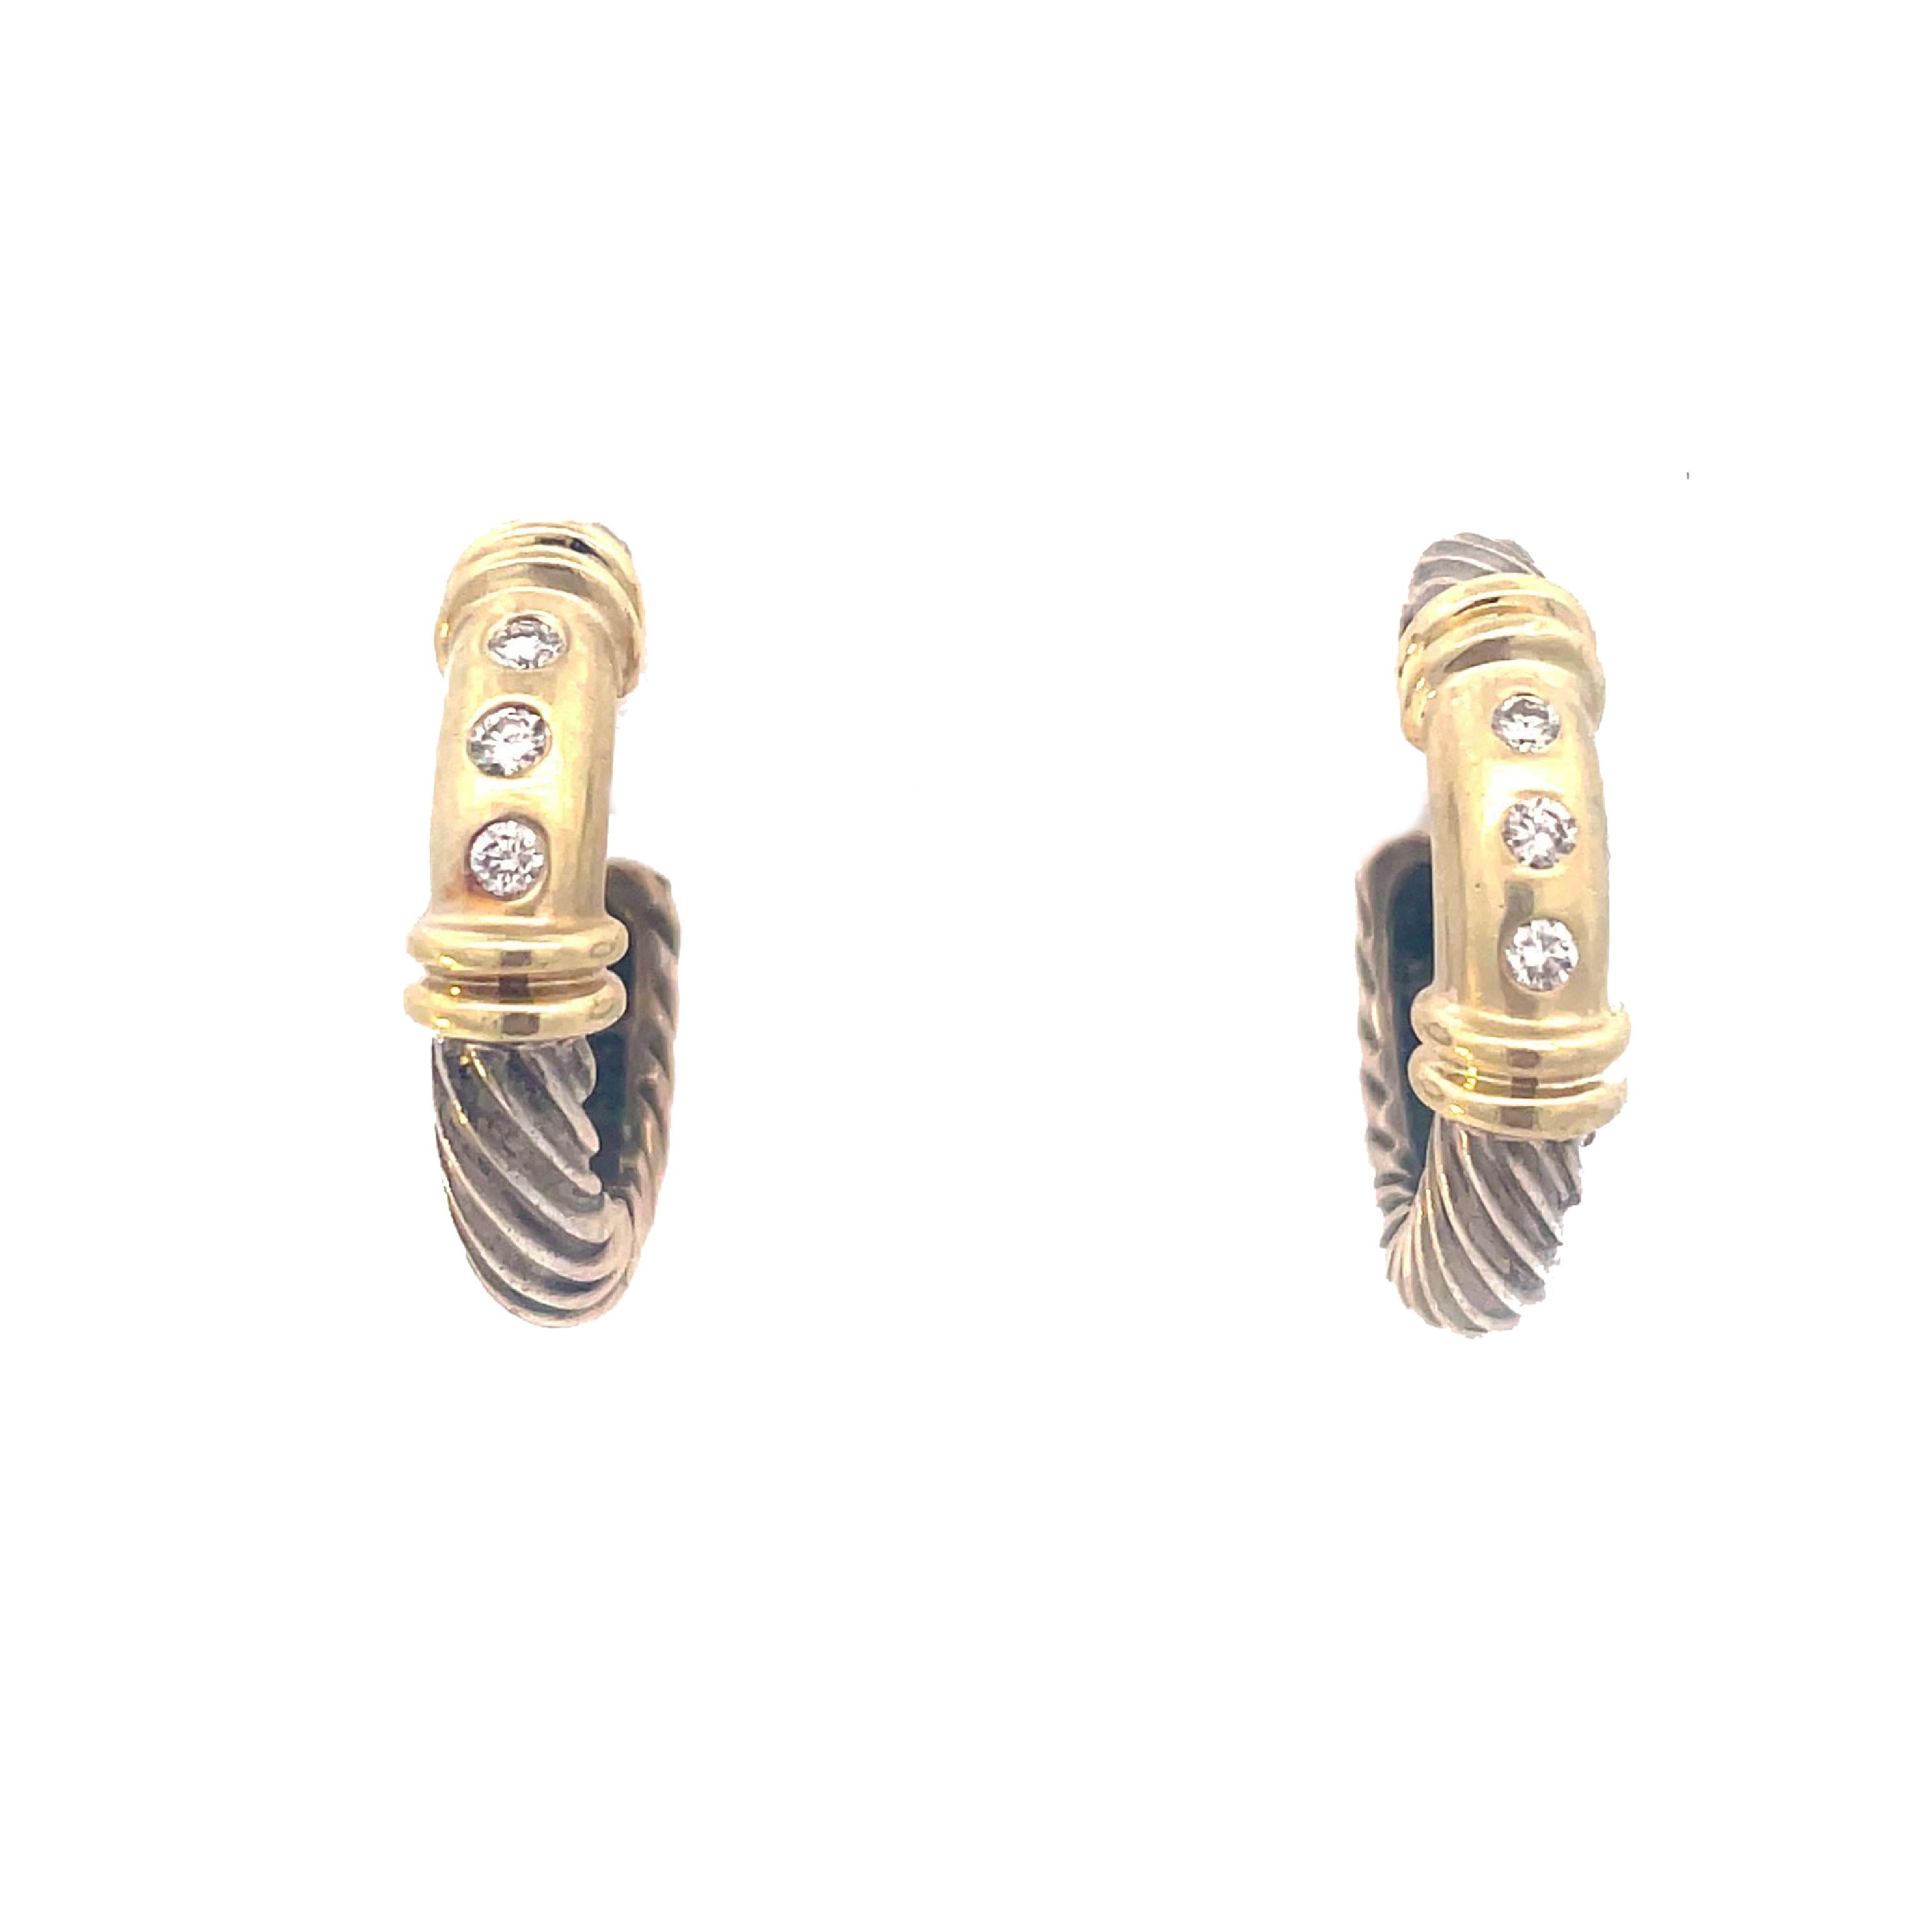 This is a classic pair of hoop earrings by David Yurman crafted in sterling silver and 14K yellow gold that showcases the infamous twisted rope metro design and is adorned with three sparkling round diamonds on each earring. These earrings are the